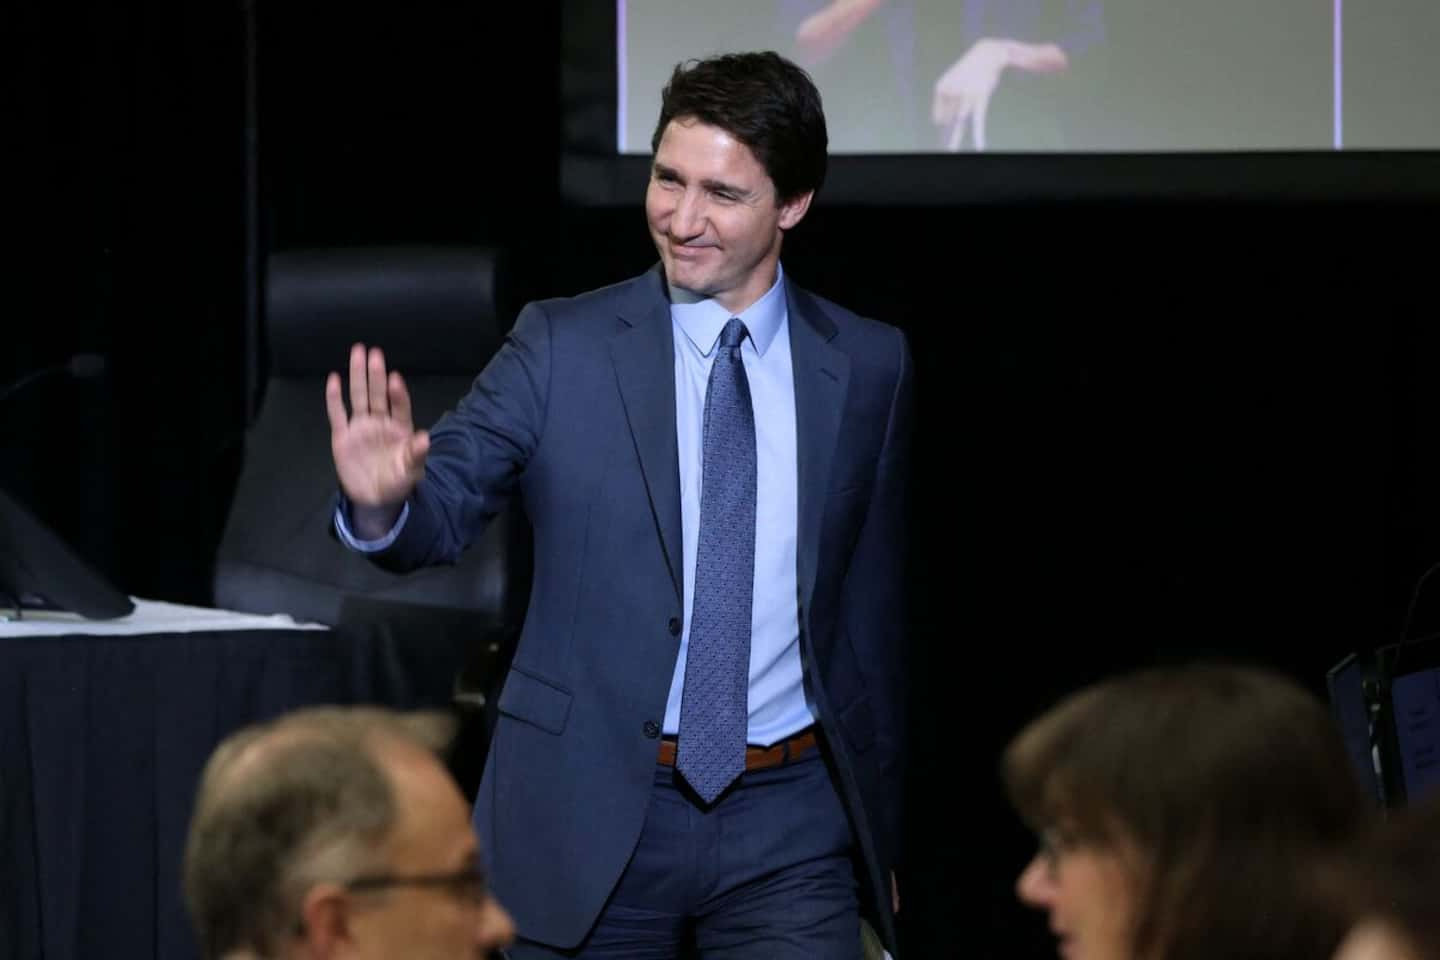 New Year's wishes: economy, electrification and gun control on the menu for Trudeau